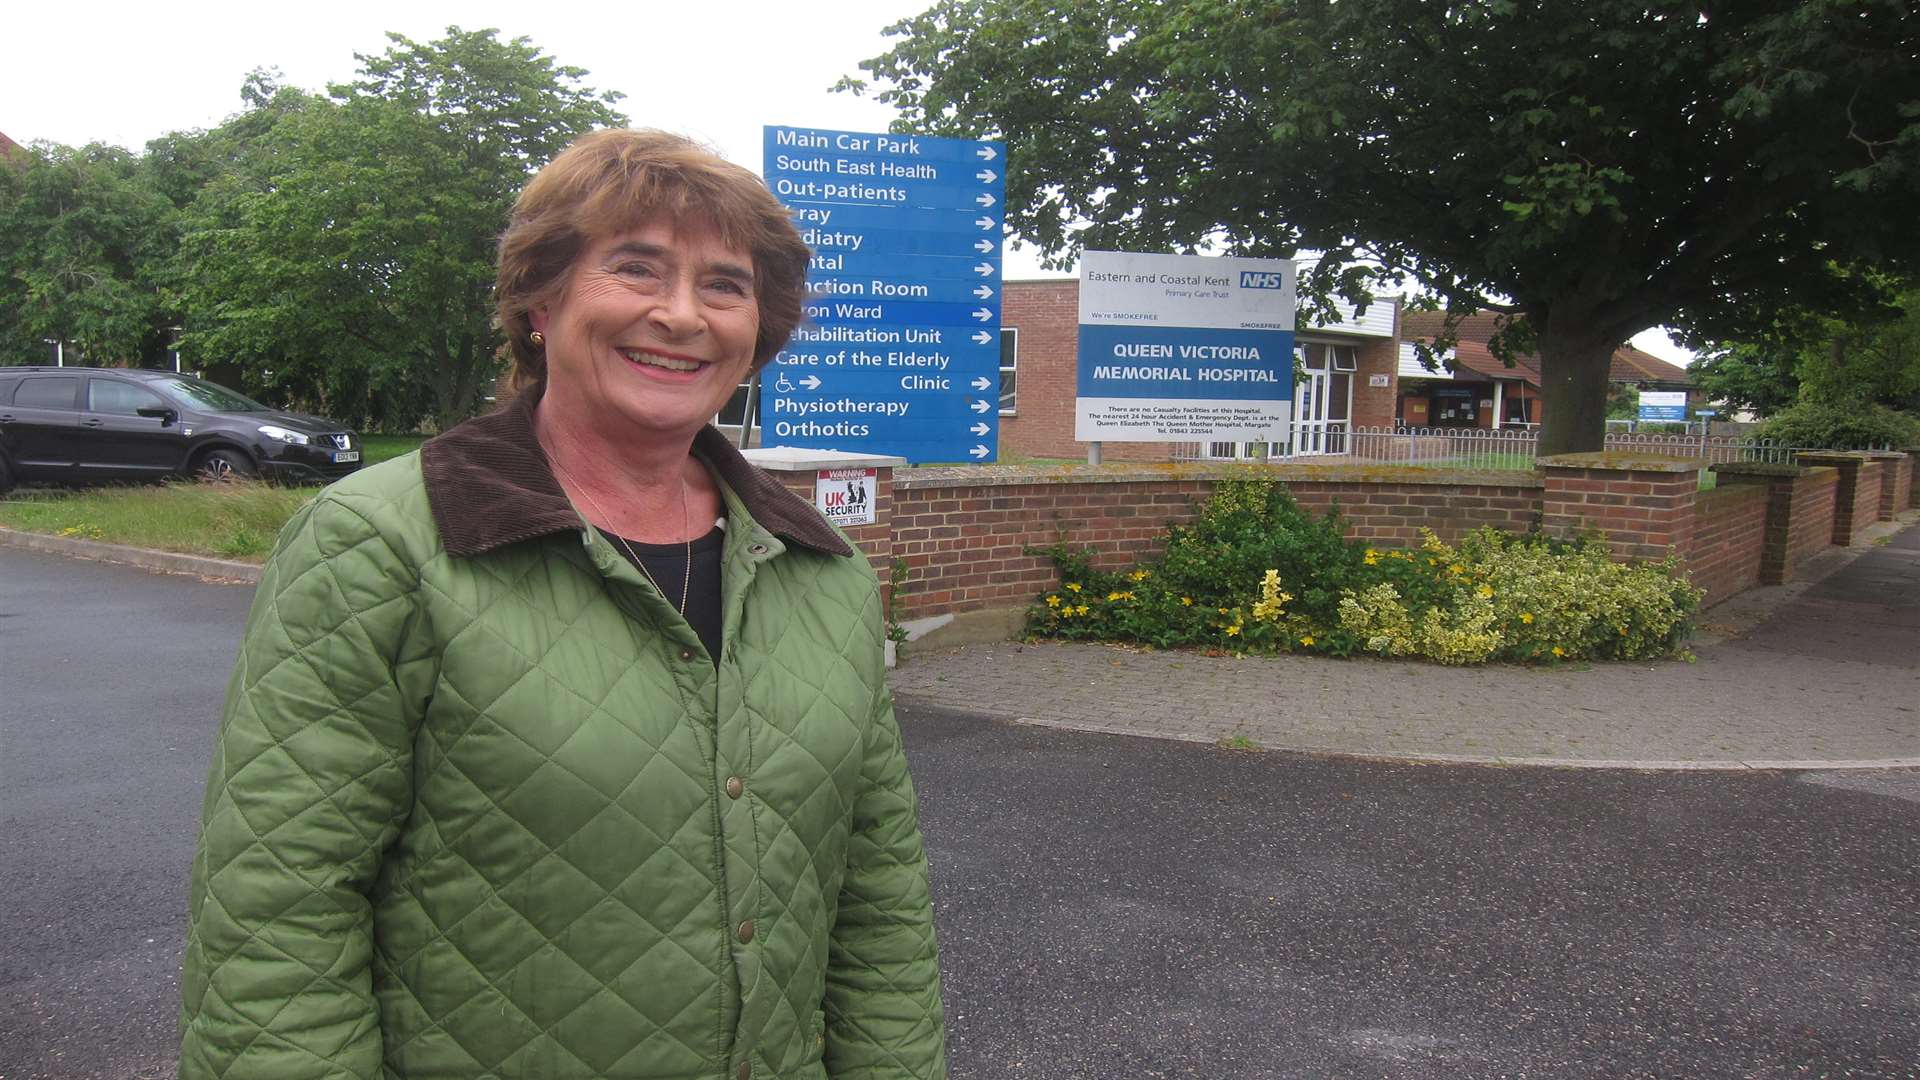 Chairman of the League of Friends to the Queen Victoria Hospital in Herne Bay, Gillian Fowler